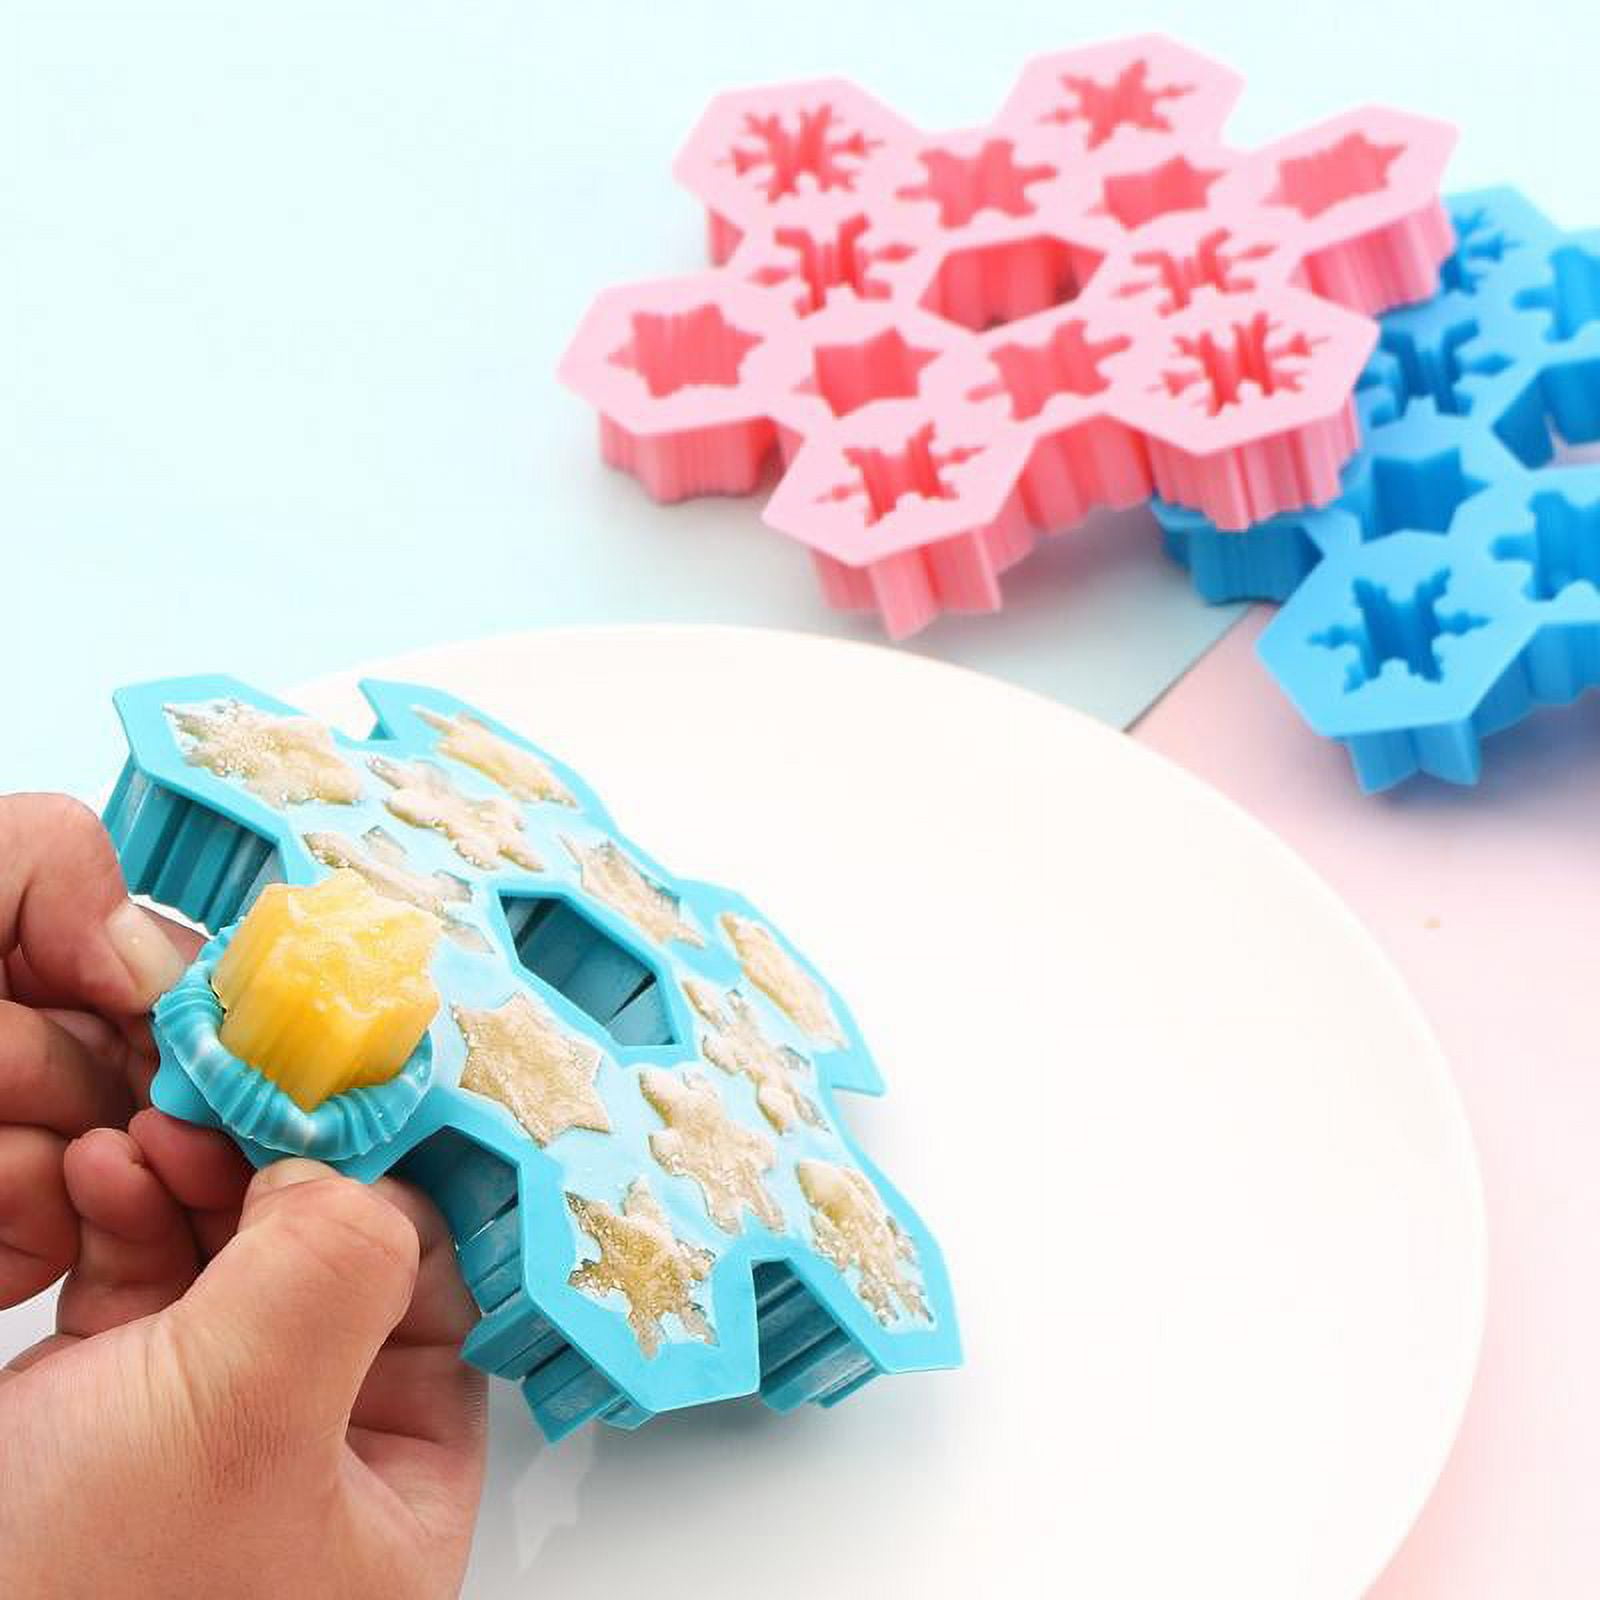 2 Pcs 12 Grids Silicone Ice Cube Trays Snowflake Shaped Chocolate DIY Mould Cupcake Dessert Baking Mold (Sky-blue), Size: 7.09 x 6.3 x 1.57